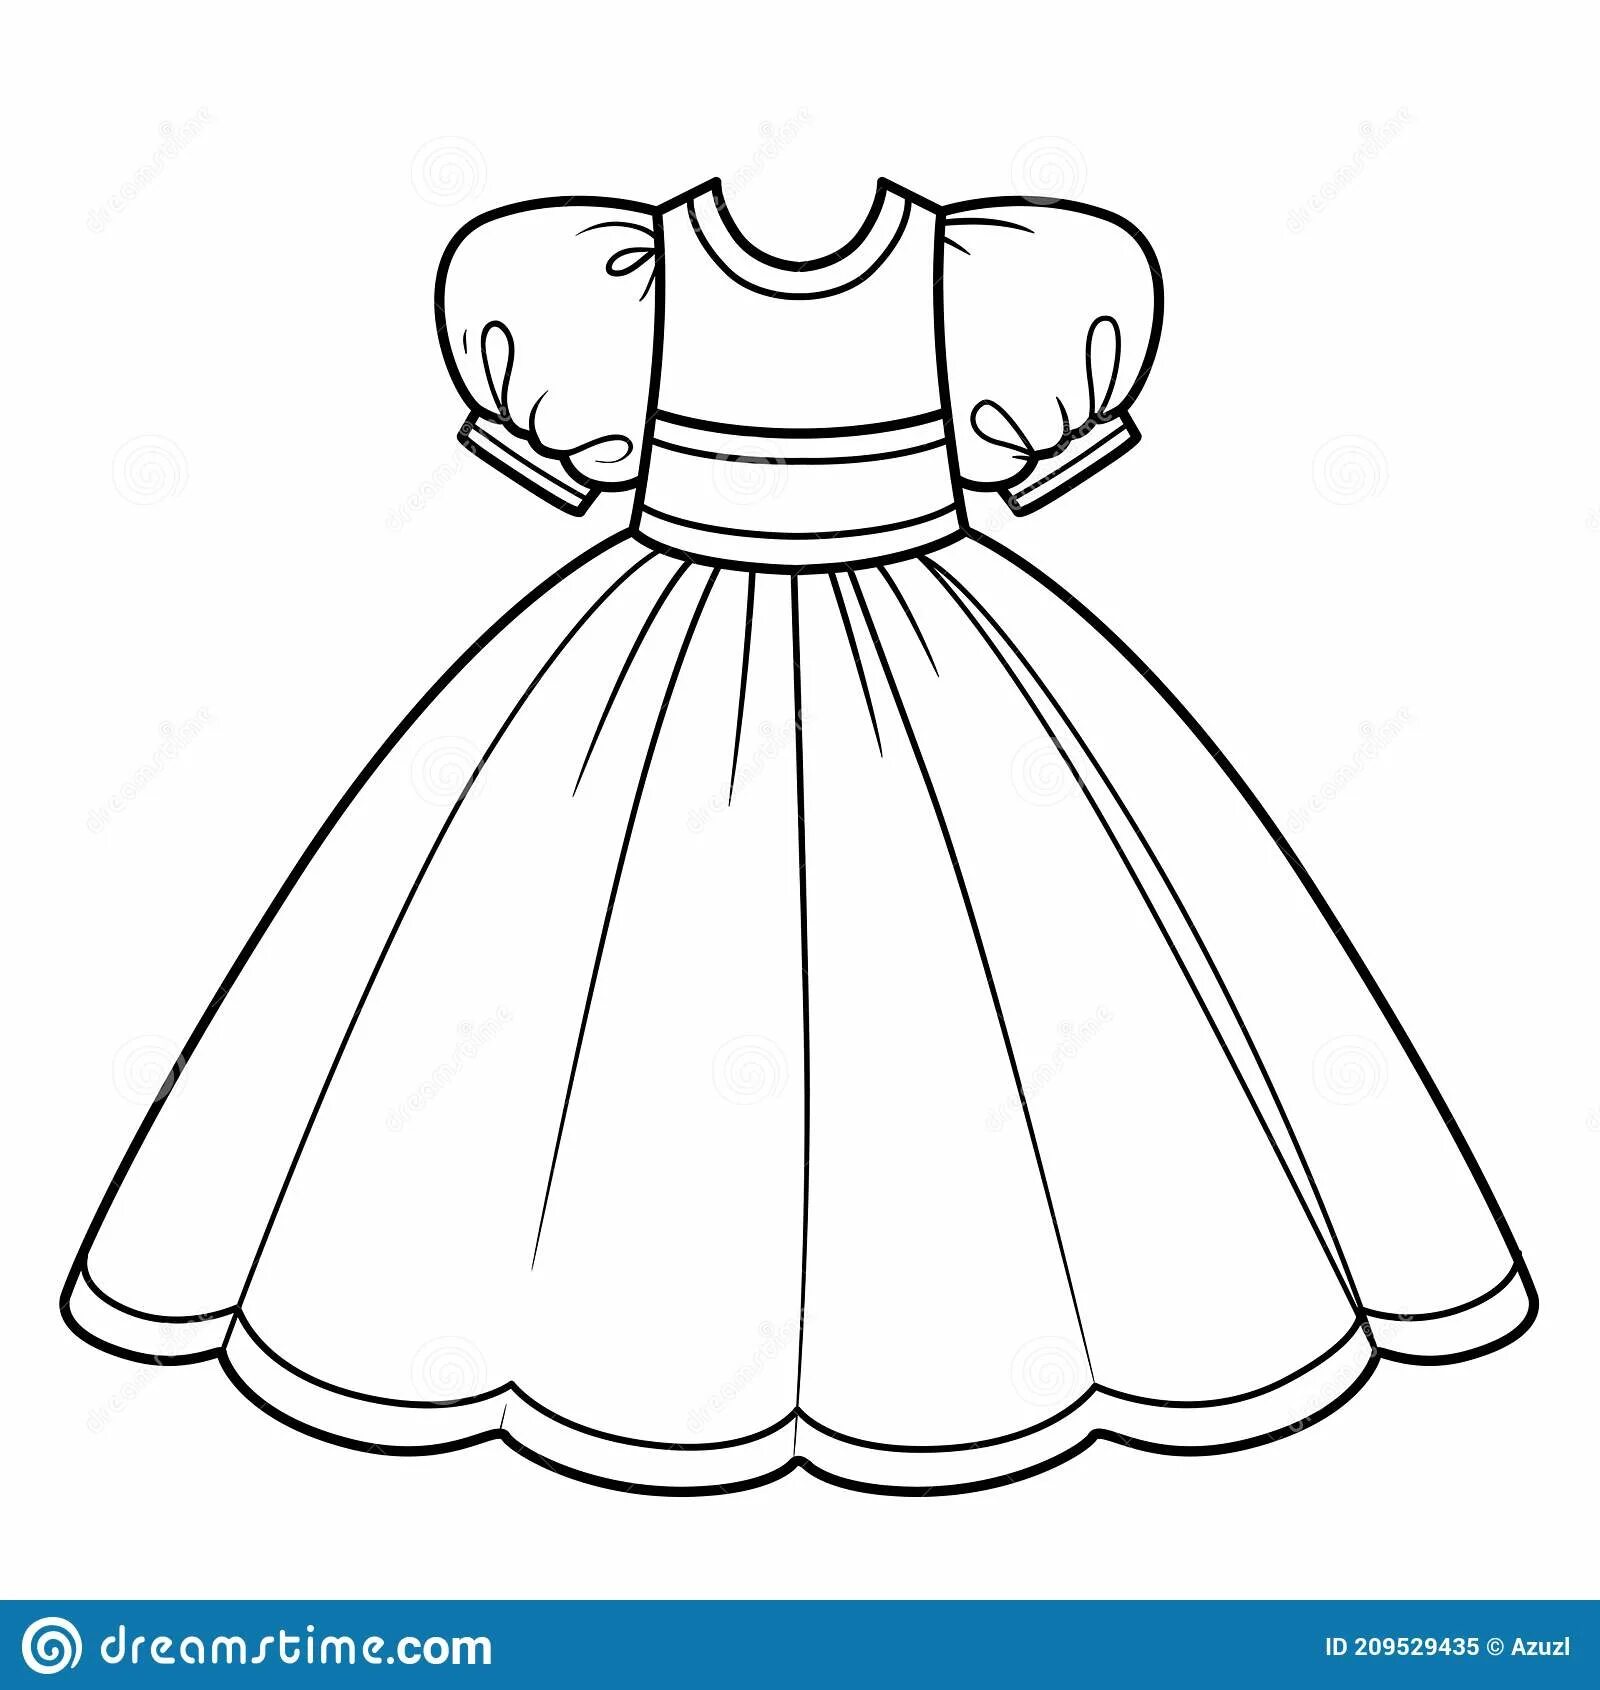 Coloring page luxury puffy dress